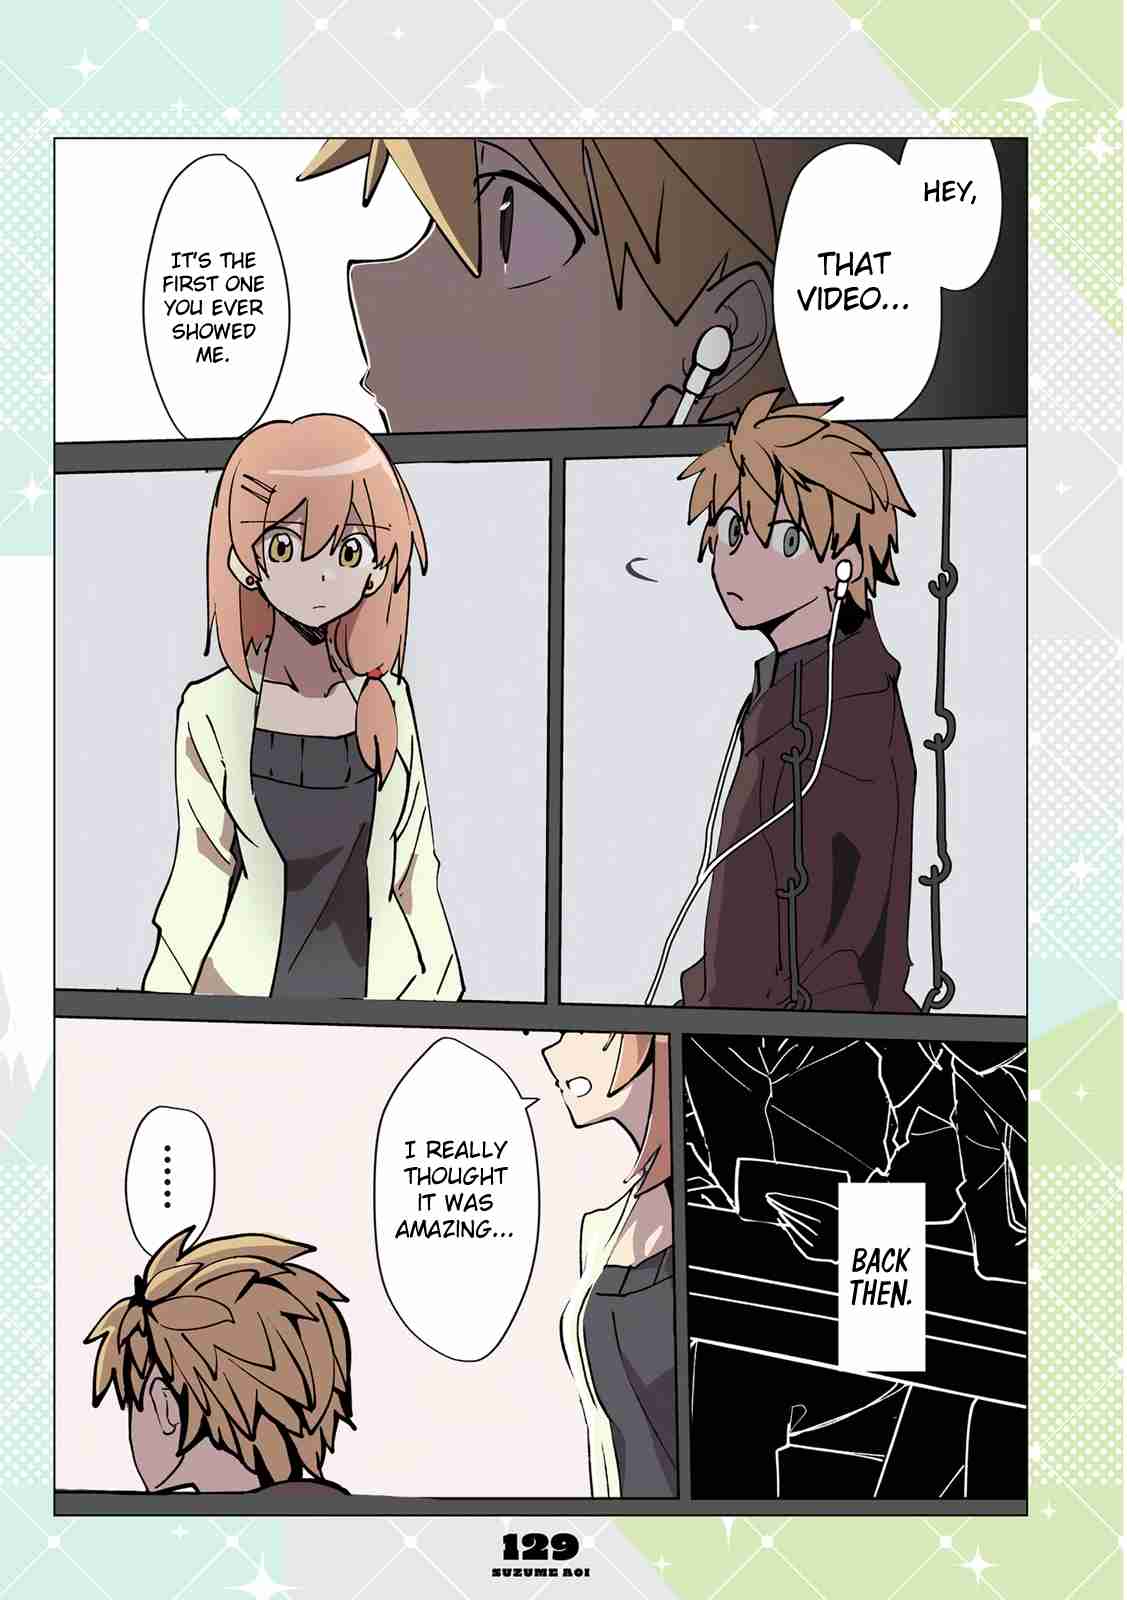 Mousou Timeline Vol. 1 Ch. 9.3 The Story Of A Girl Who Cares For Her Boyfriend